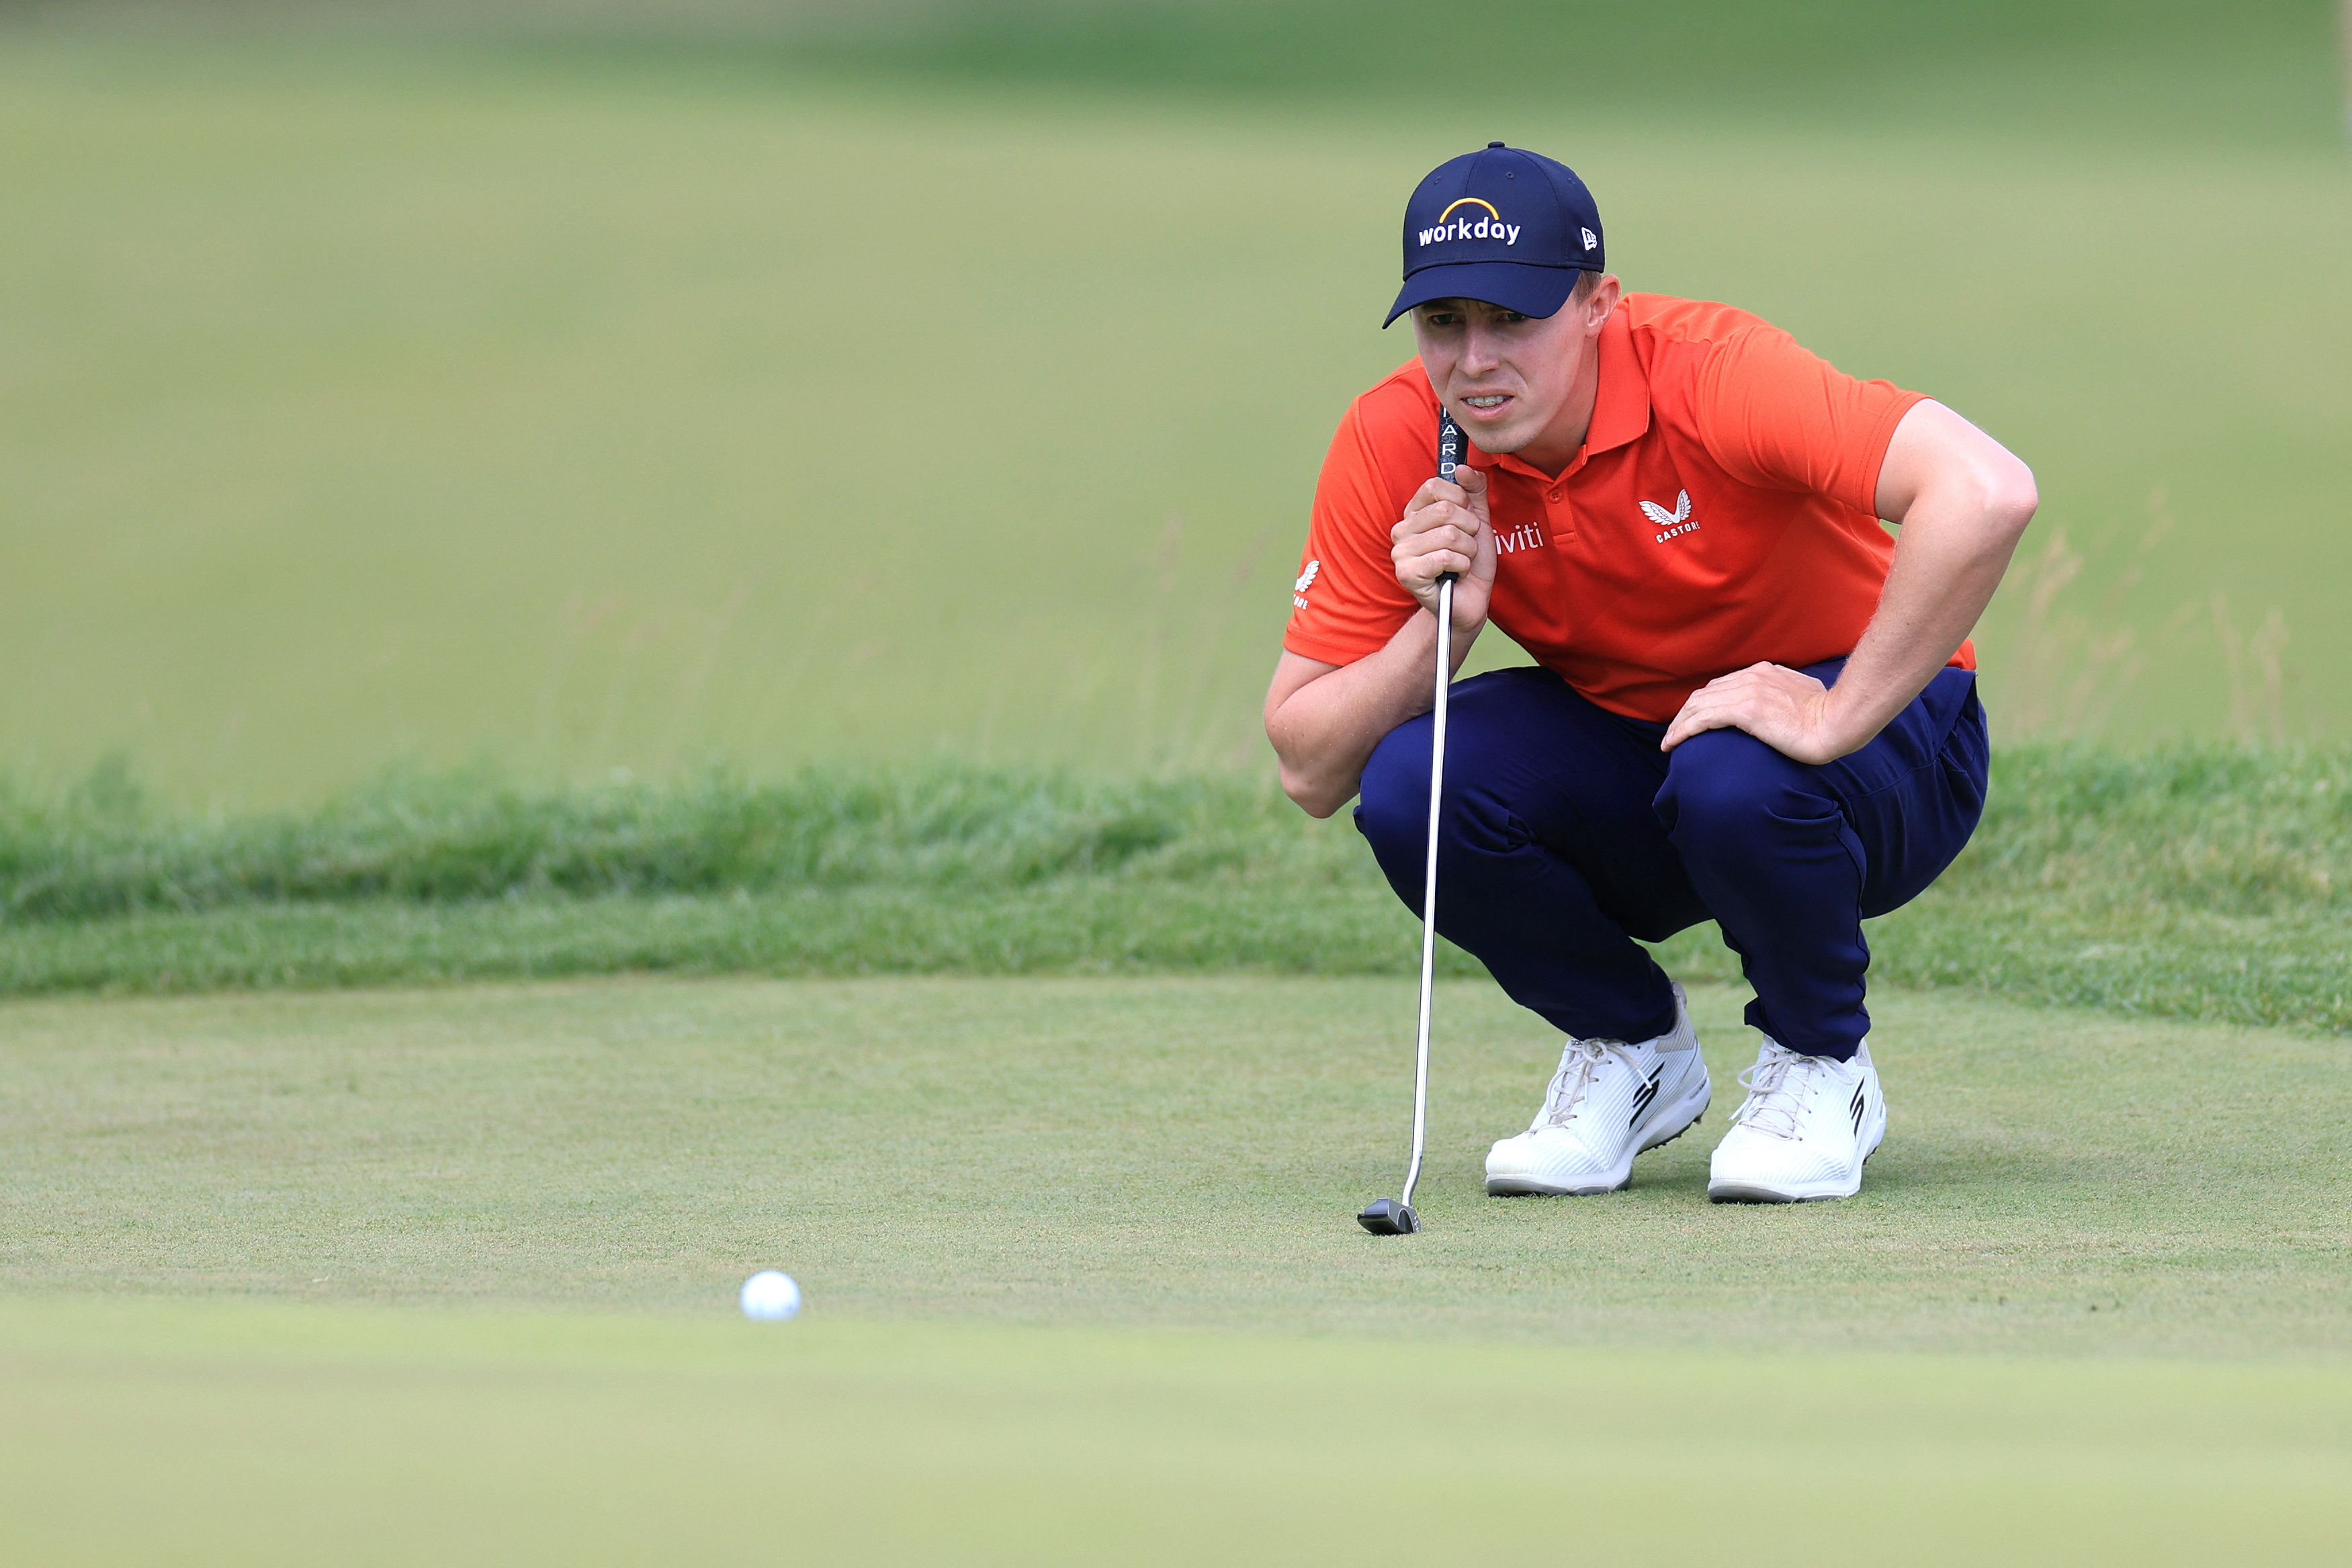 Matt Fitzpatrick prepares for the second green match and aims to maintain his lead in the final round